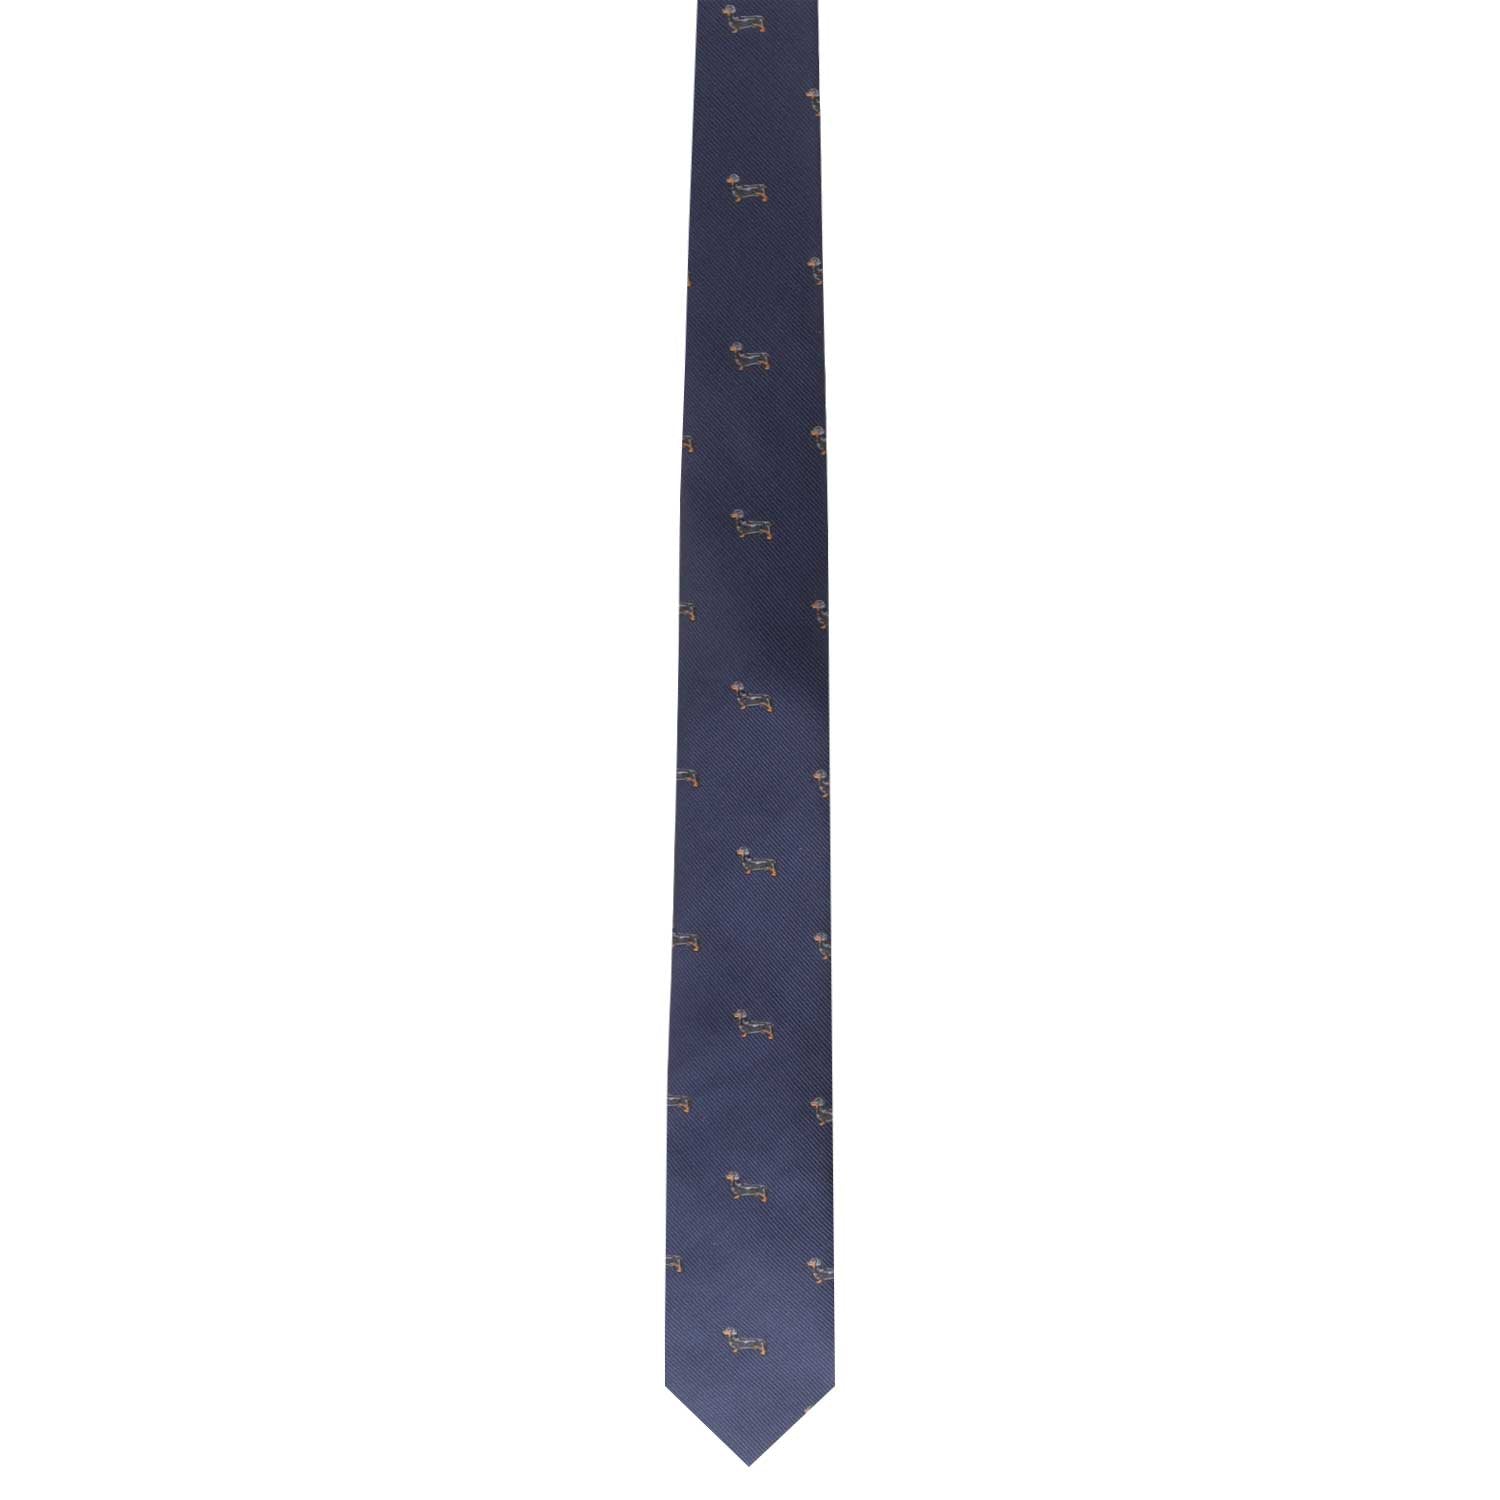 A Sausage Dog Skinny Tie with a playful look.